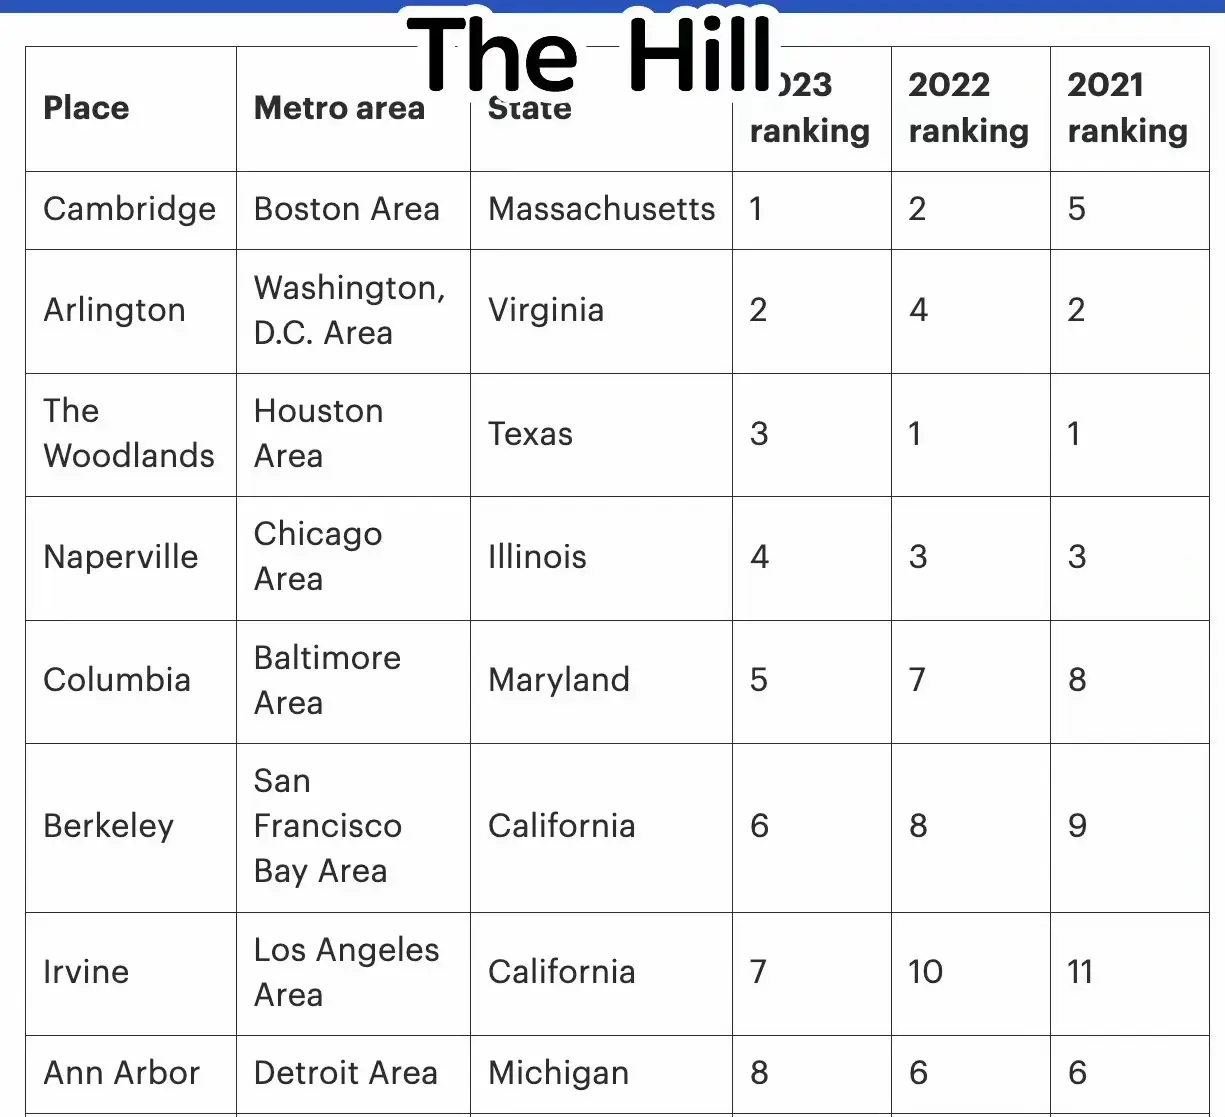  A list of metro areas and states